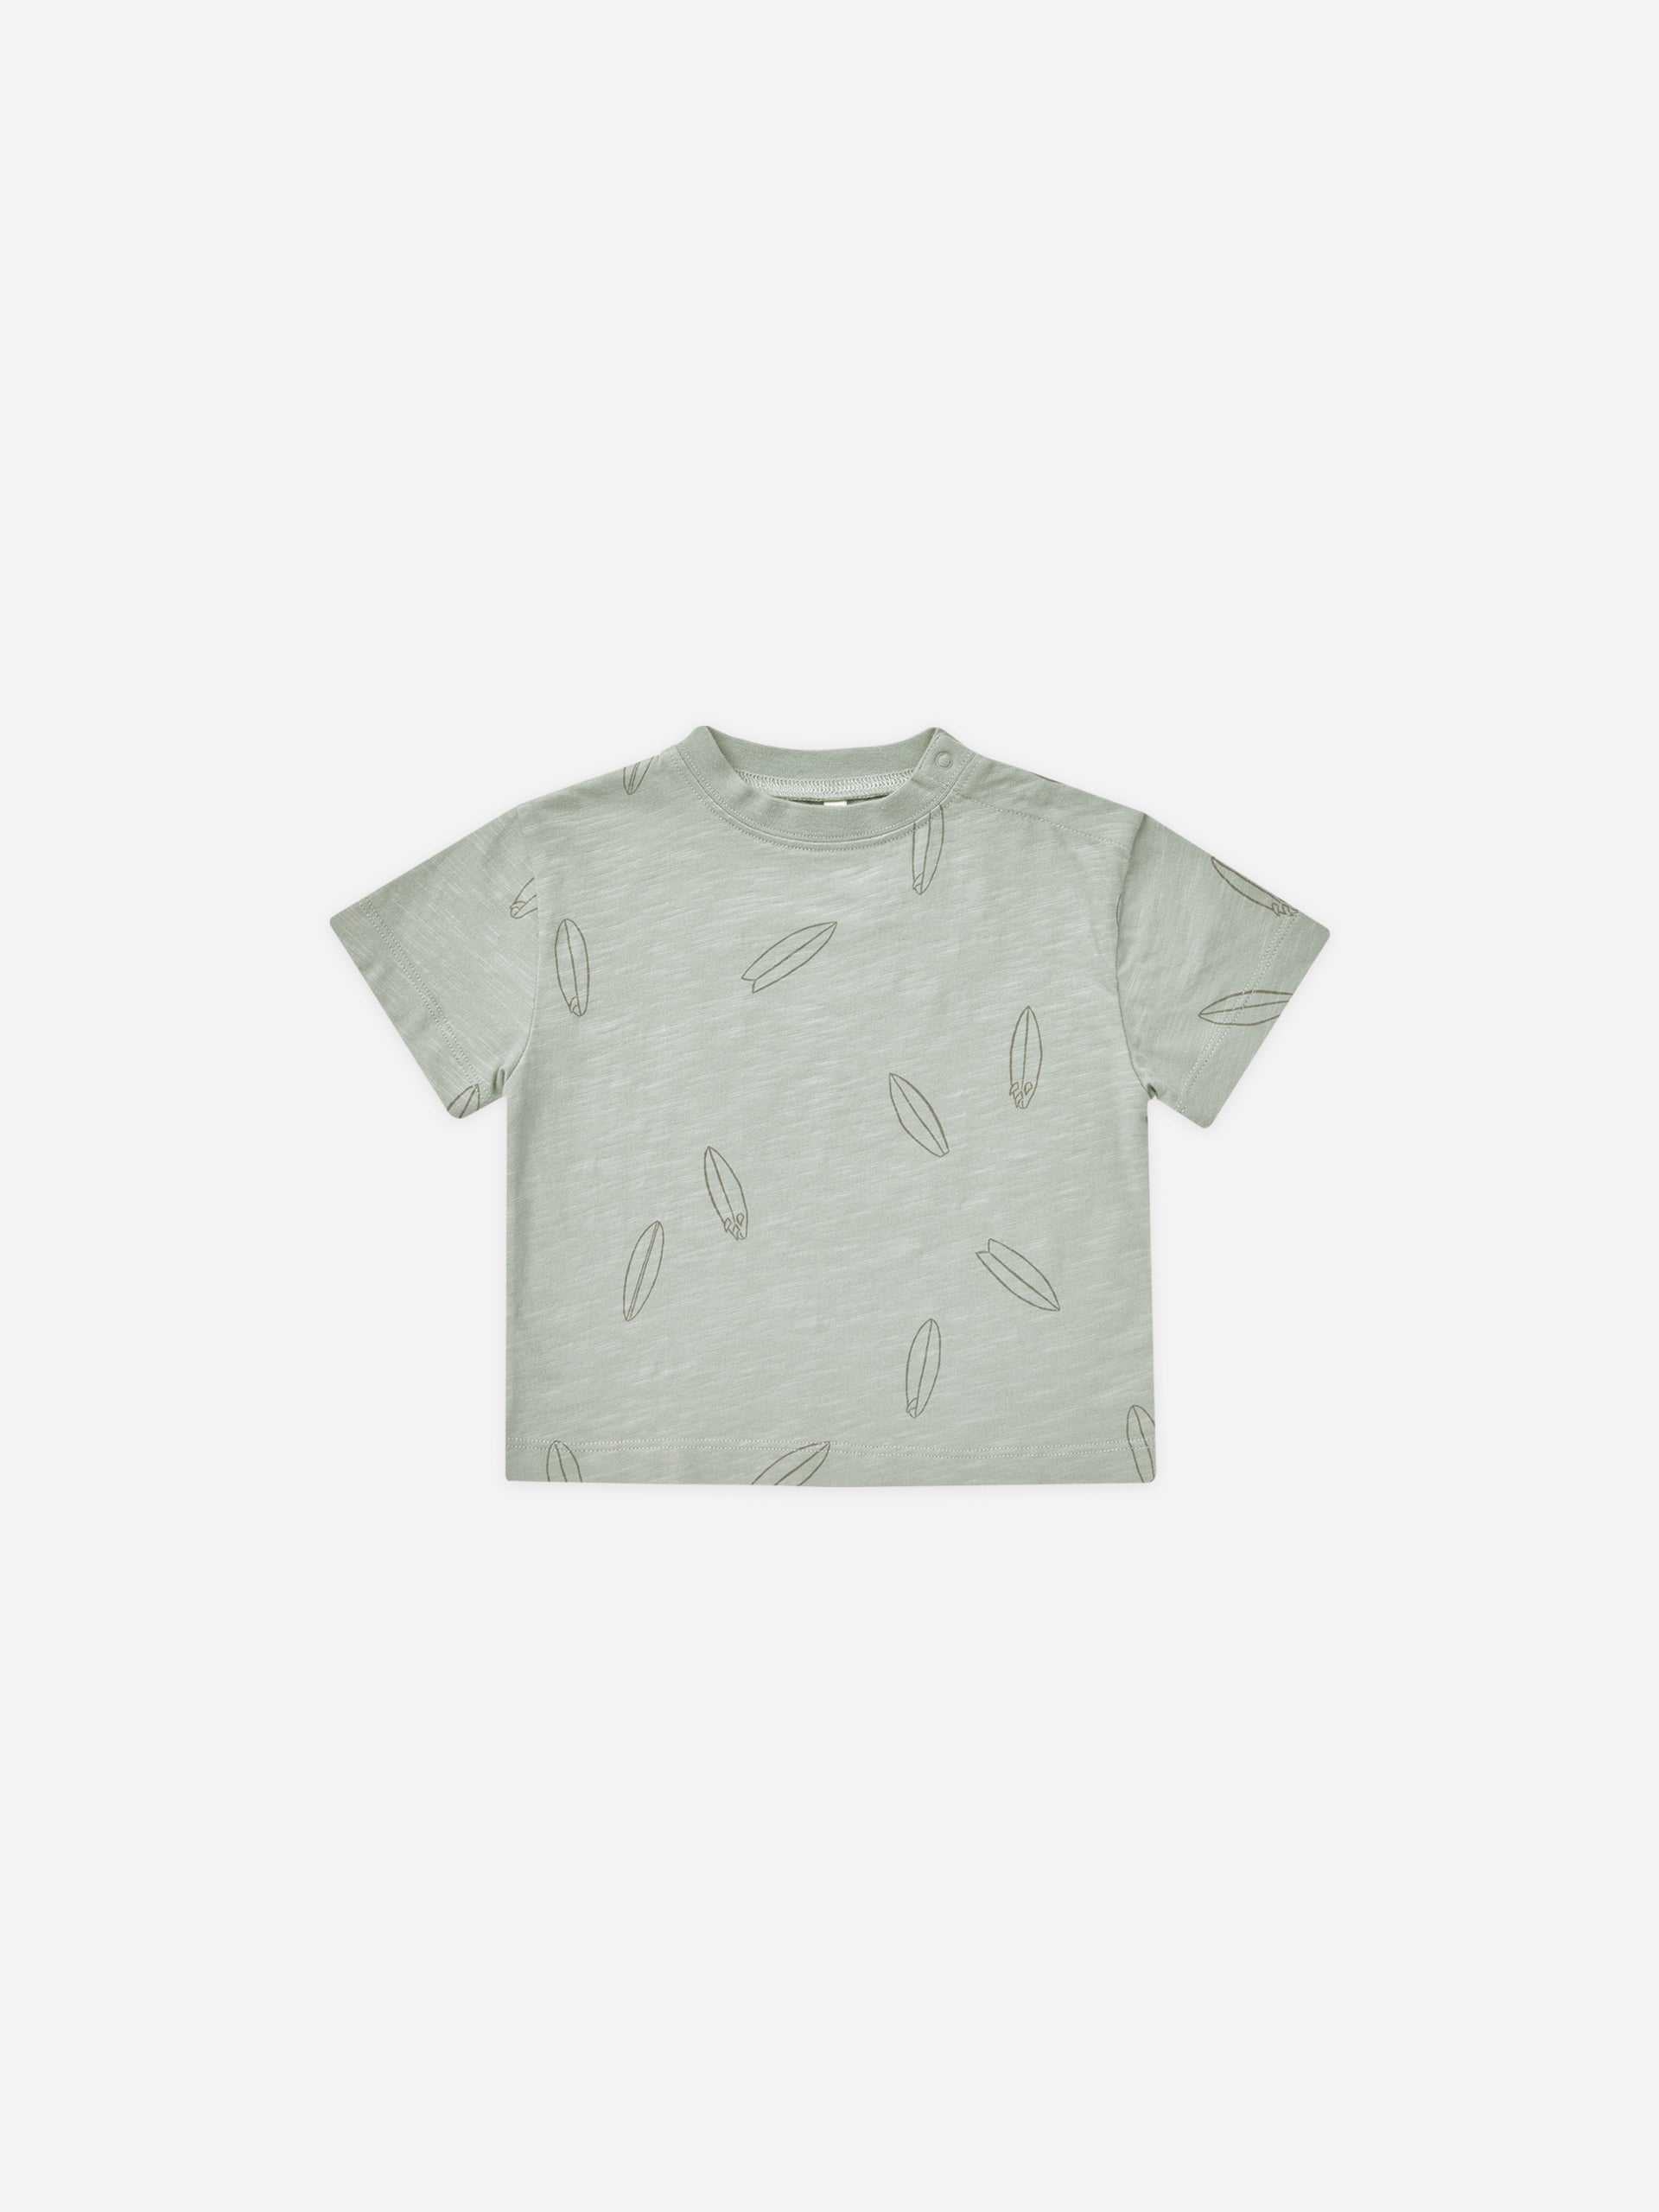 Relaxed Tee || Surfboard - Rylee + Cru | Kids Clothes | Trendy Baby Clothes | Modern Infant Outfits |